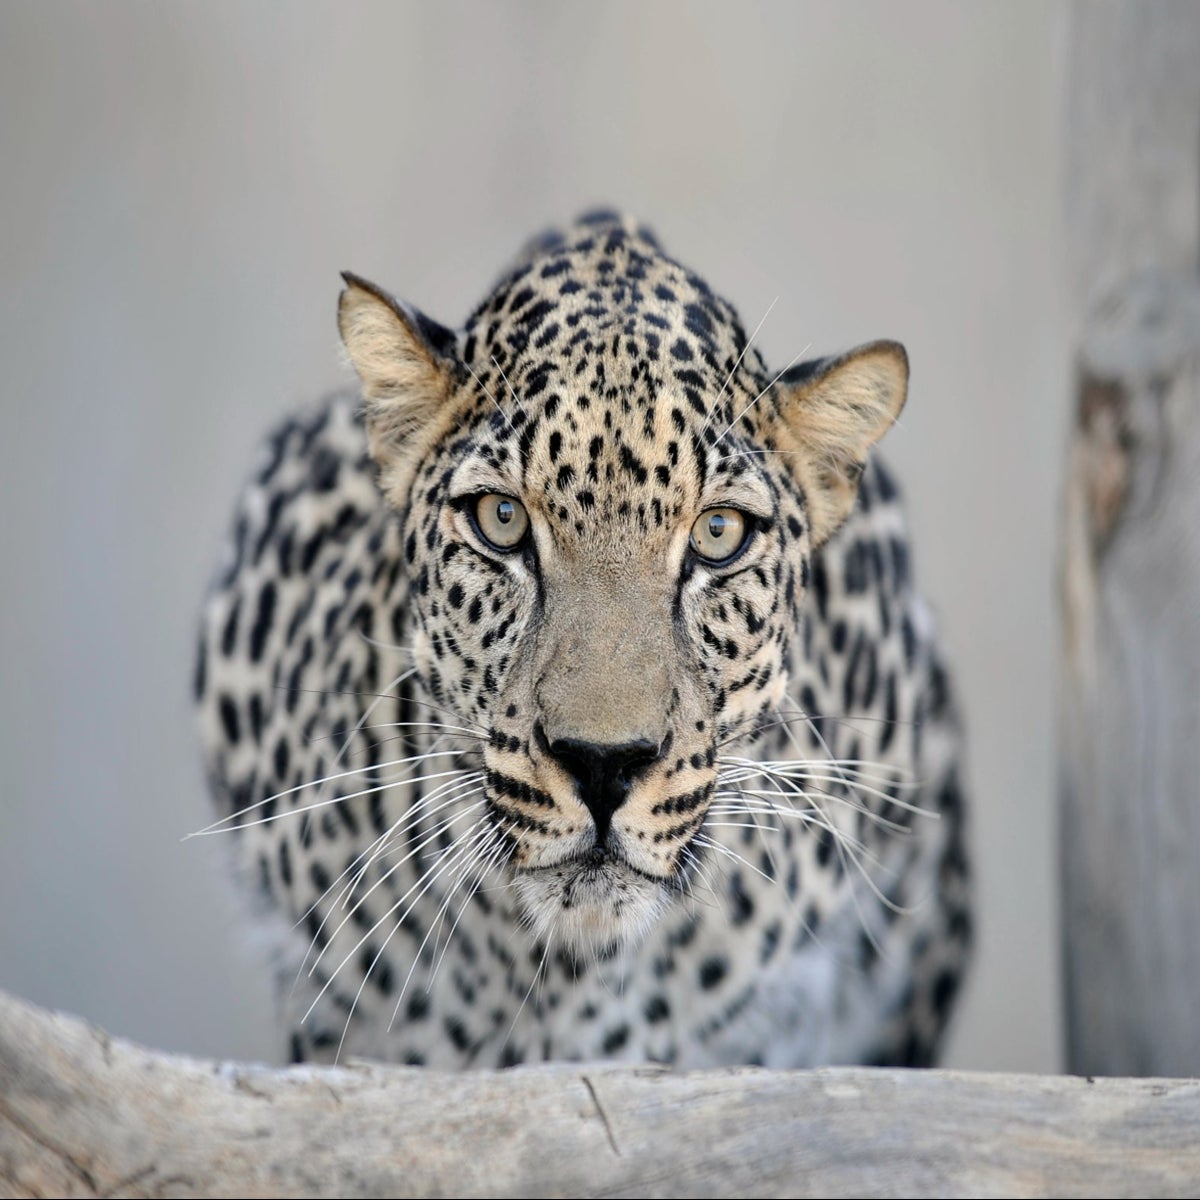 Born to be wild: A daring vision of the Arabian leopard's future